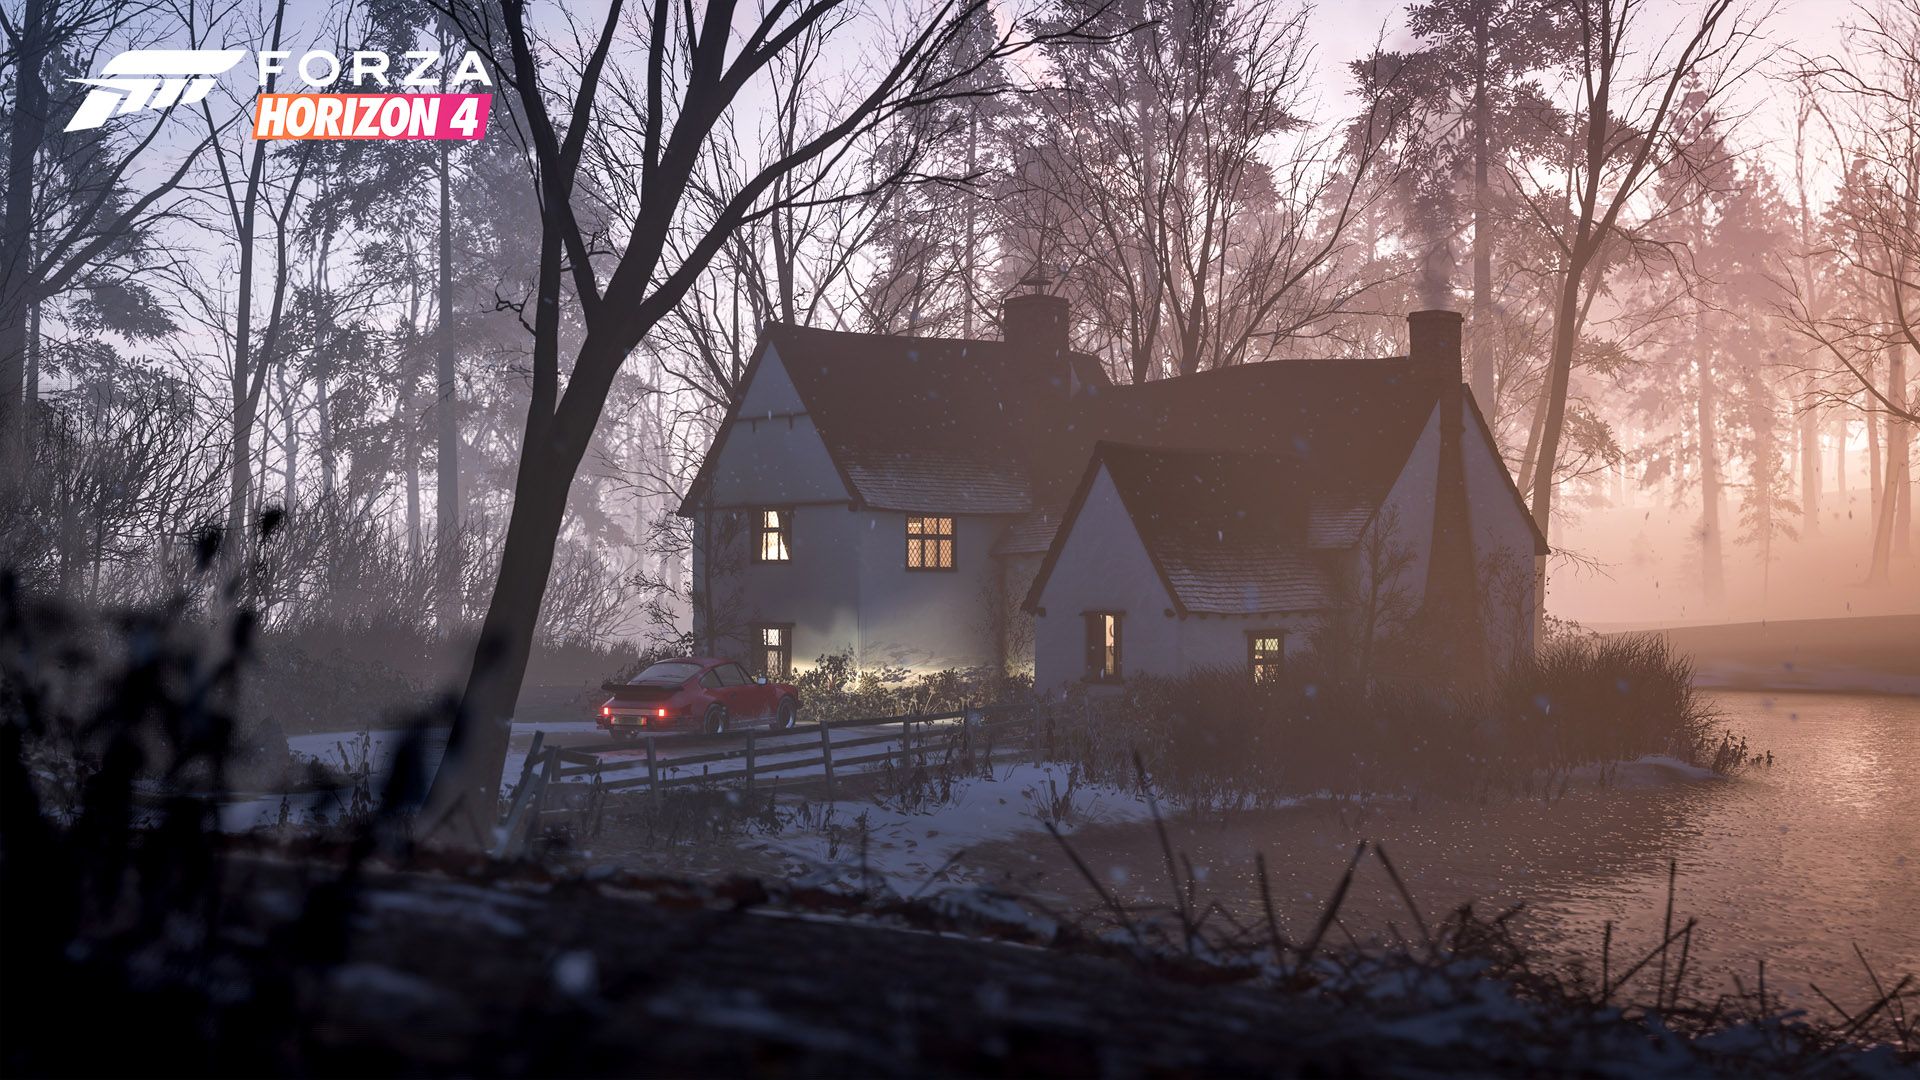 Forza Horizon 4 Reveal Trailer: Set in Britain And With A Hovercraft